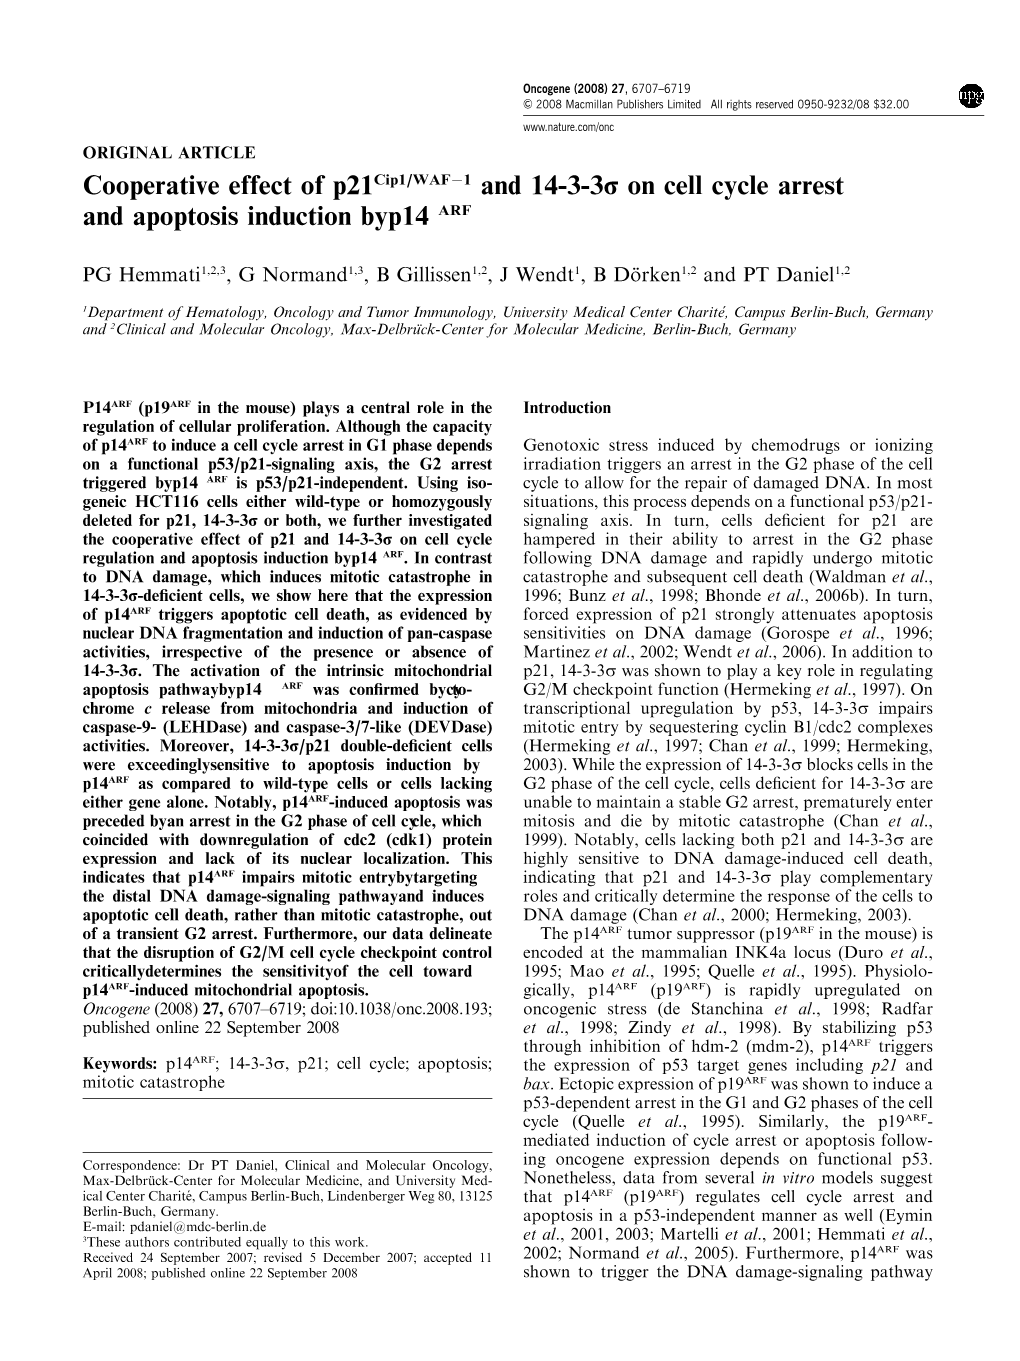 Cooperative Effect of P21cip1/WAFА1 and 14-3-3R on Cell Cycle Arrest and Apoptosis Induction by P14arf